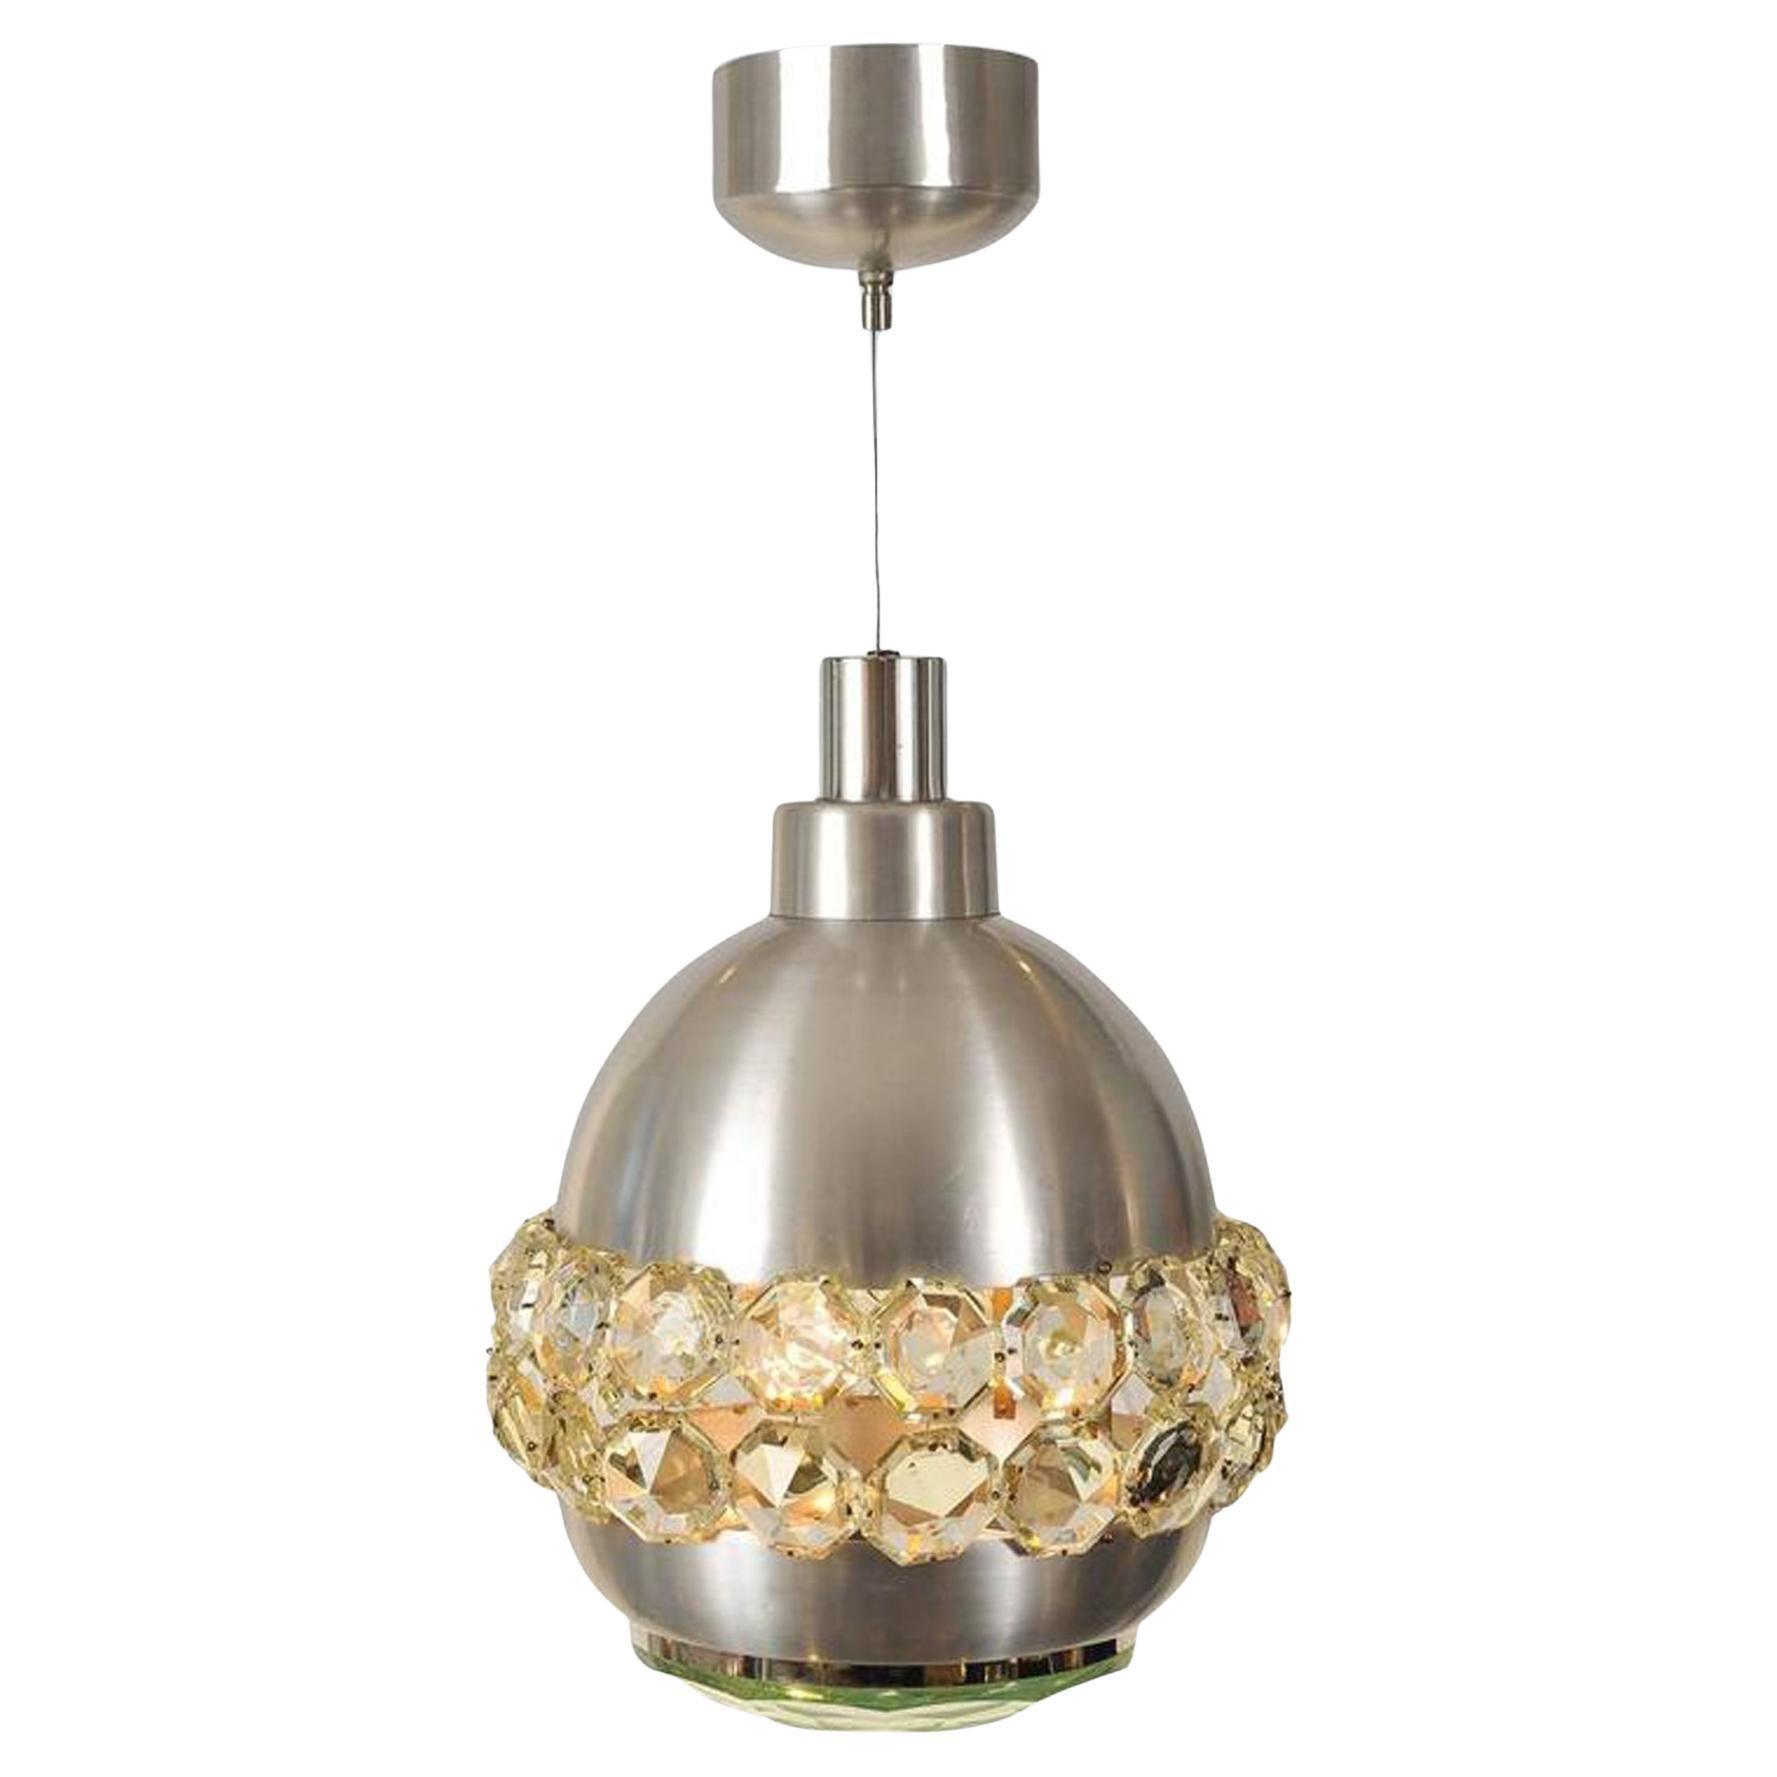 Italian 1960s chrome and glass 'Jewel' Chandelier For Sale